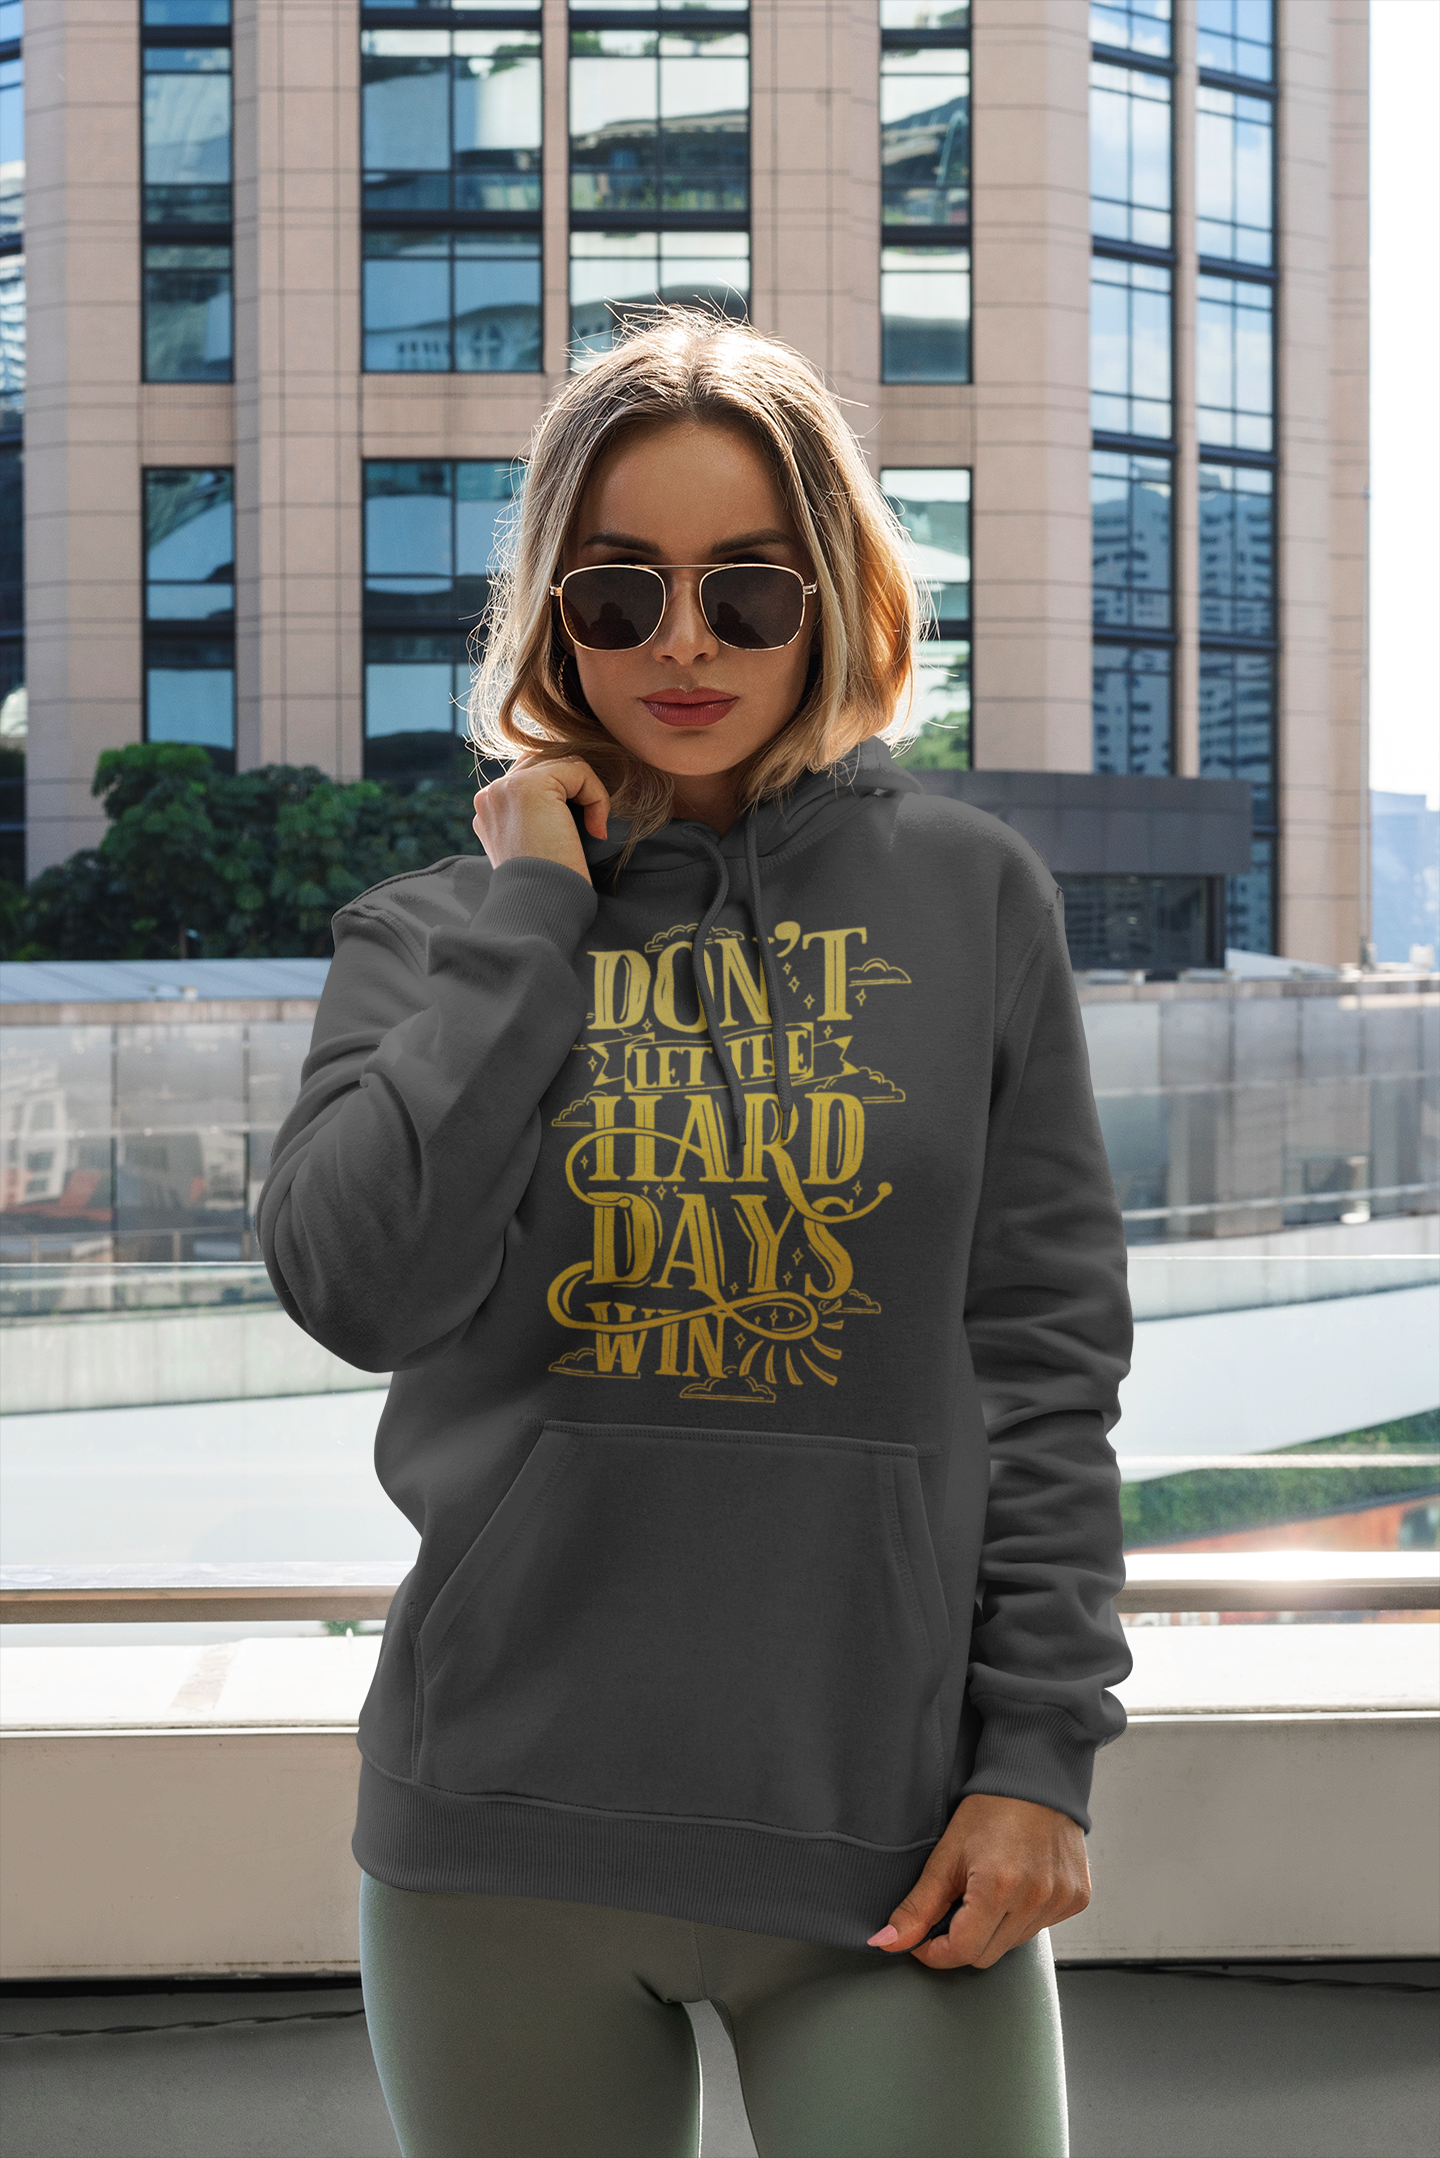 Don't let the hard days win - Hoodie - Sarah J Maas - Acotar - Officially Licensed